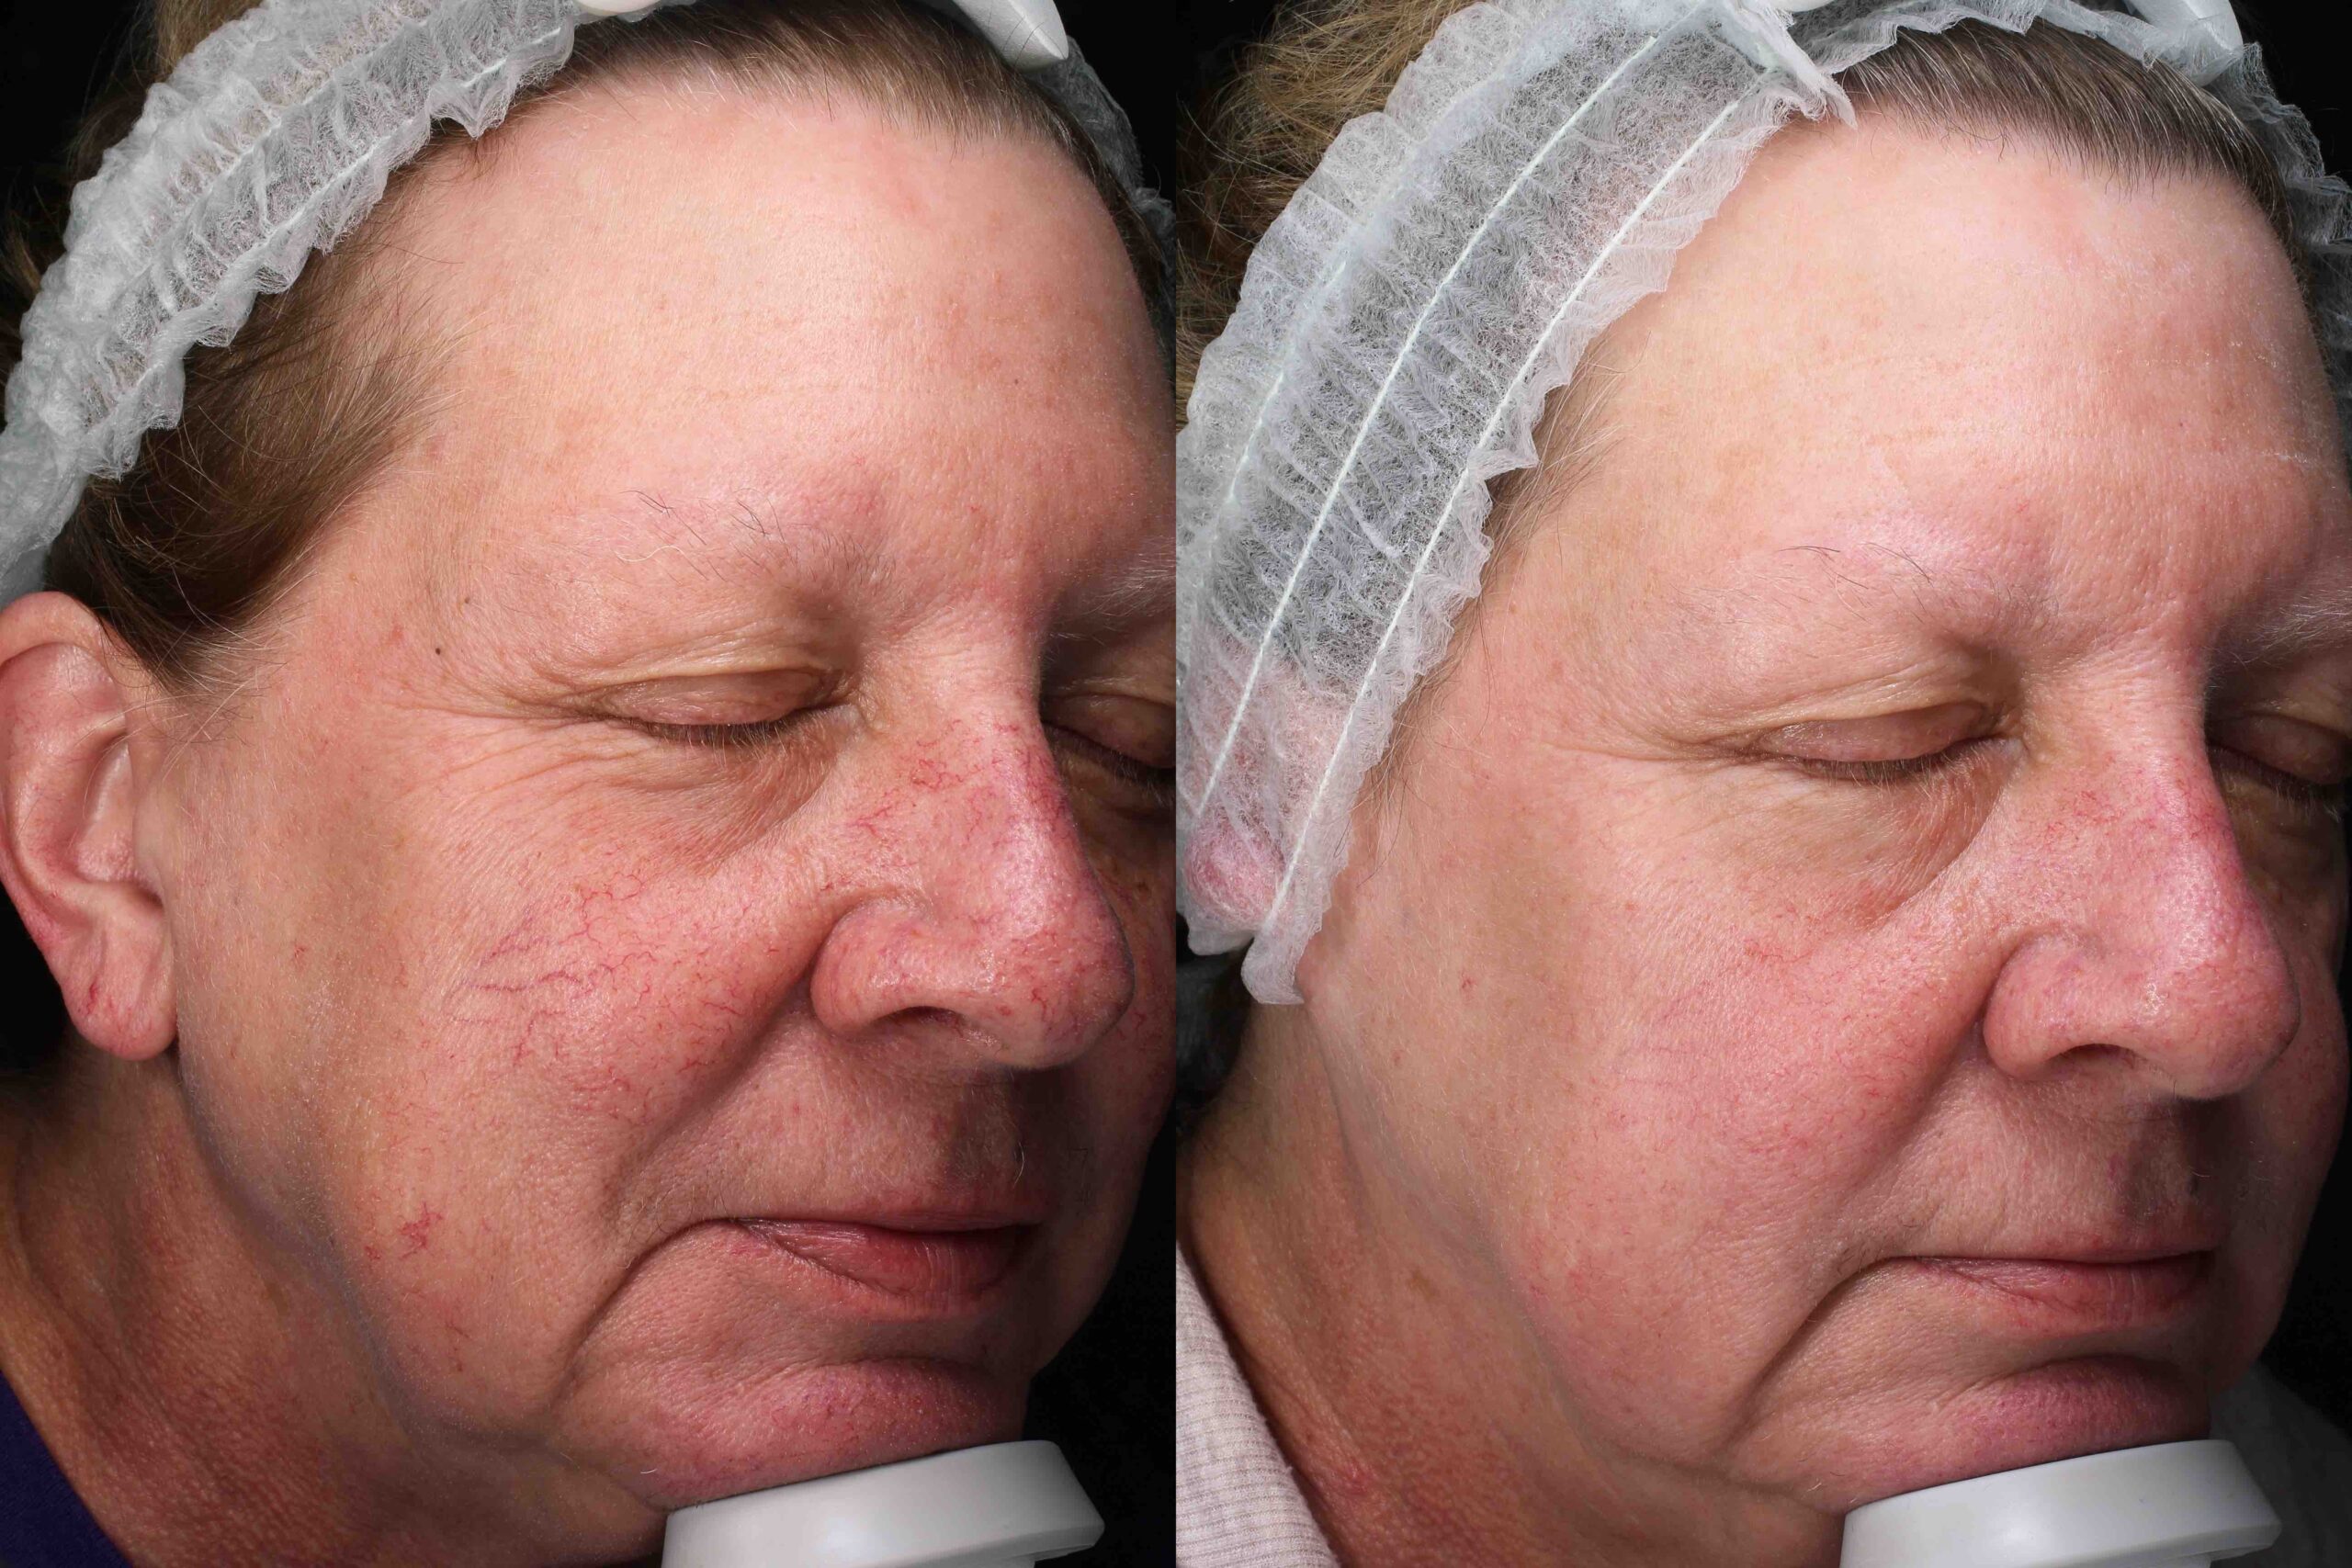 Before and after, 6 weeks post-treatment from Diolite 532 Laser, Forever Young performed by Dr. Paul Vanek (diagonal view, close up)